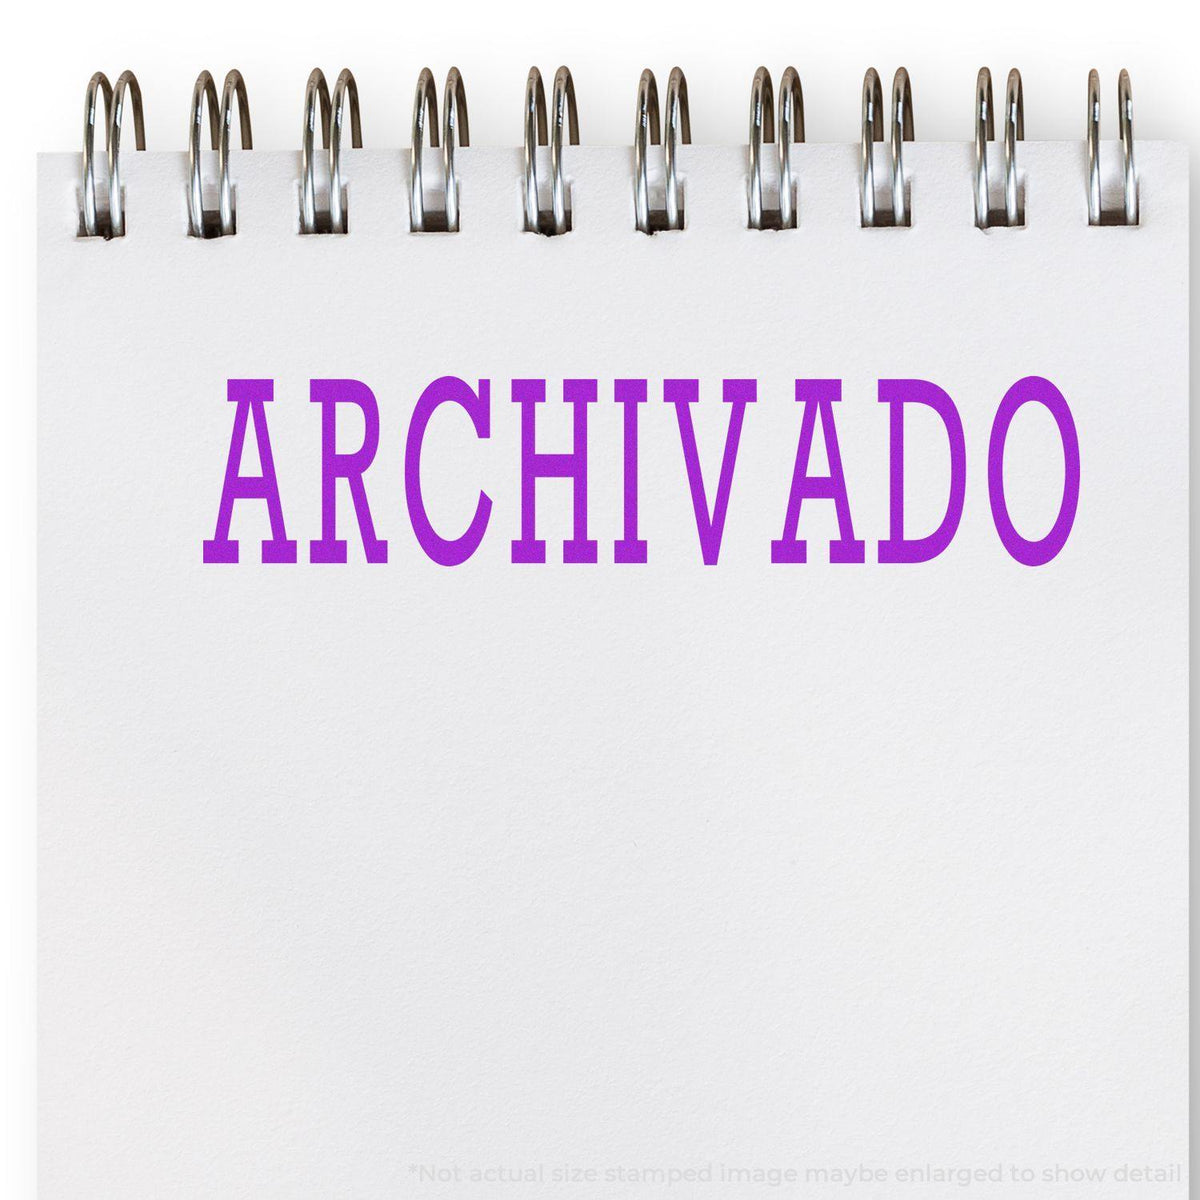 In Use Large Archivado Rubber Stamp Image